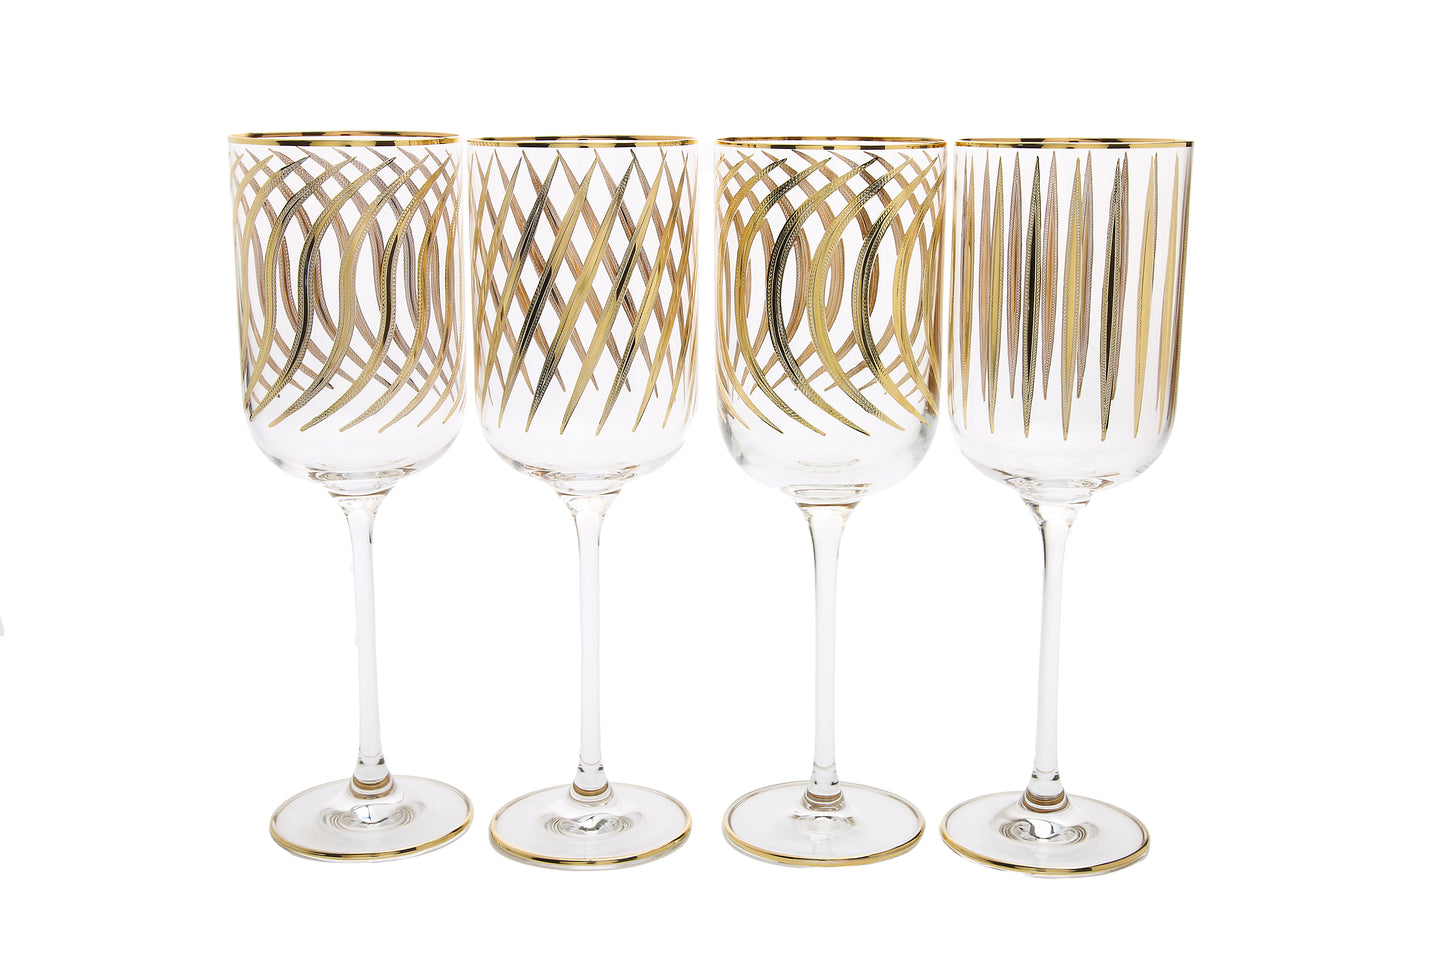 Set of 4 Mix and Match Wine Glasses with 24k Gold Design